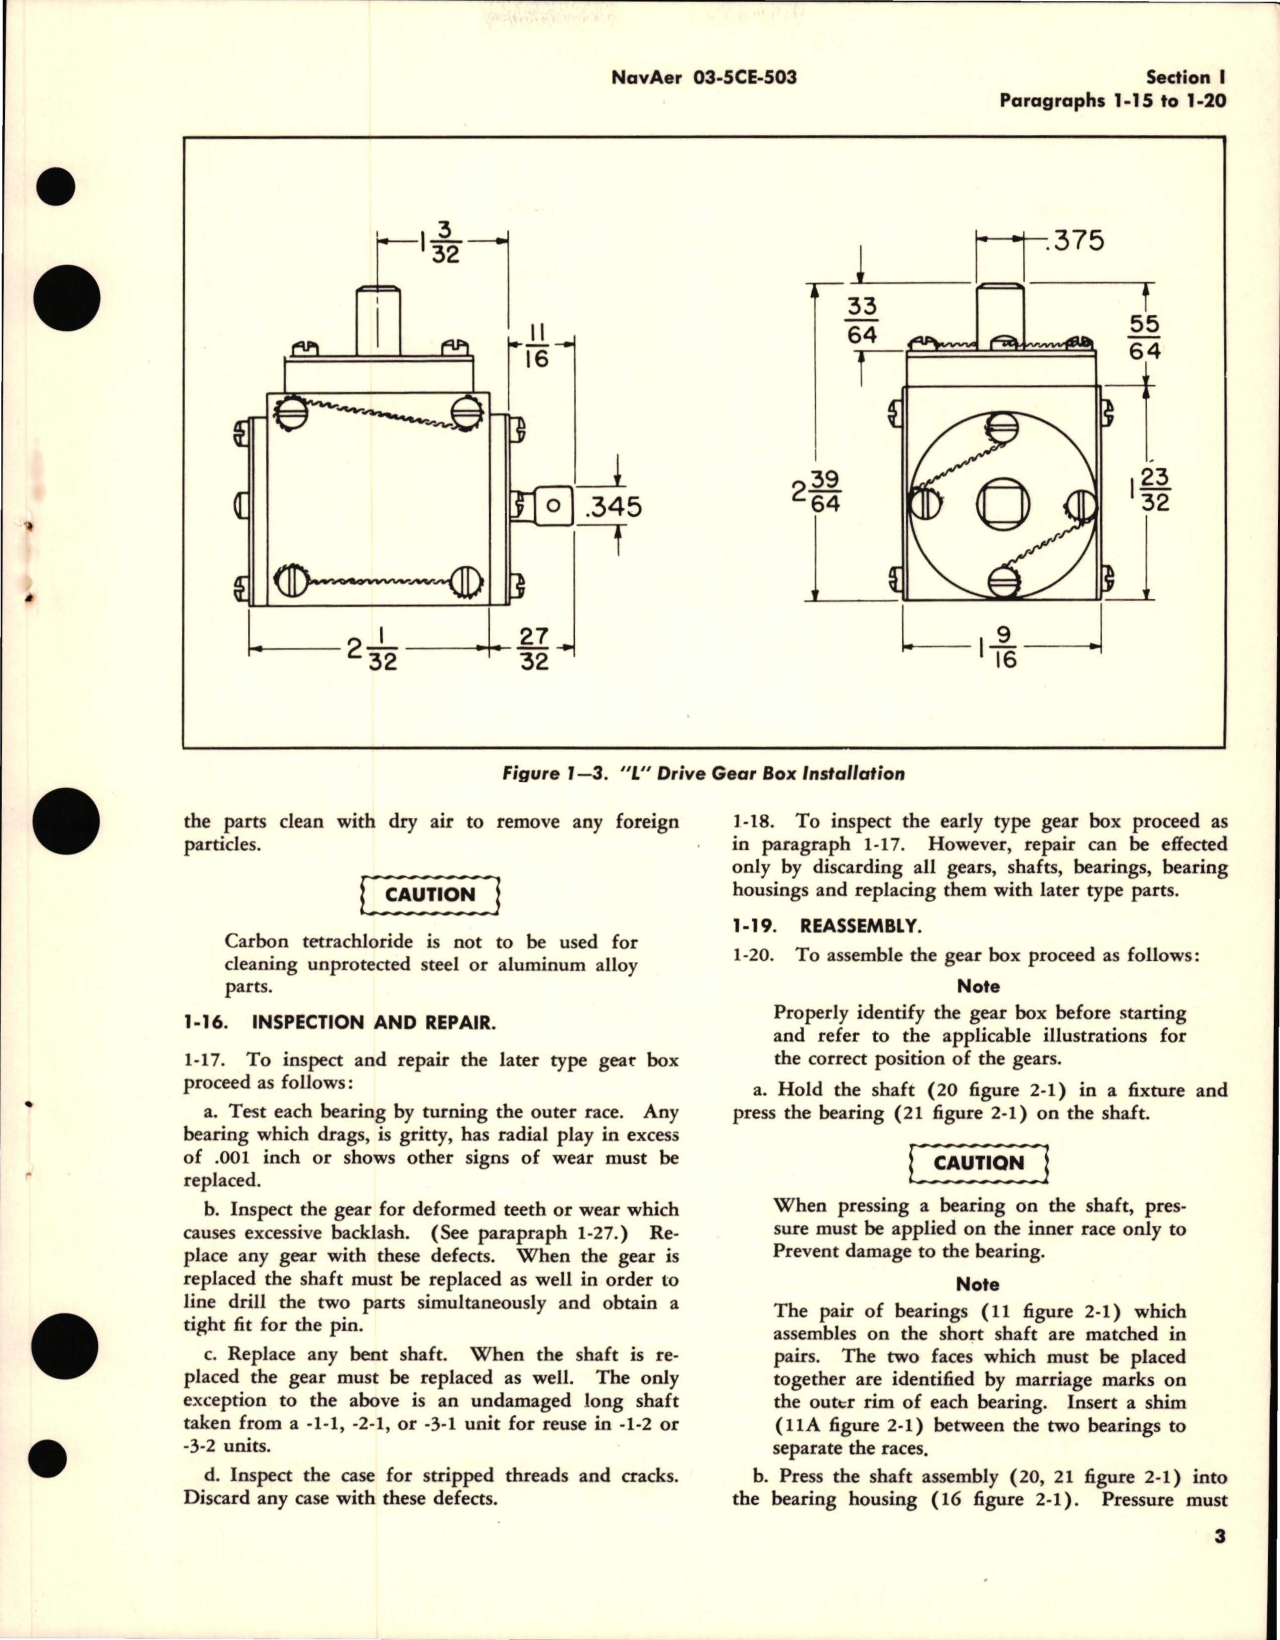 Sample page 7 from AirCorps Library document: Overhaul Instructions with Parts Catalog for L Drive Gear Box Assemblies 